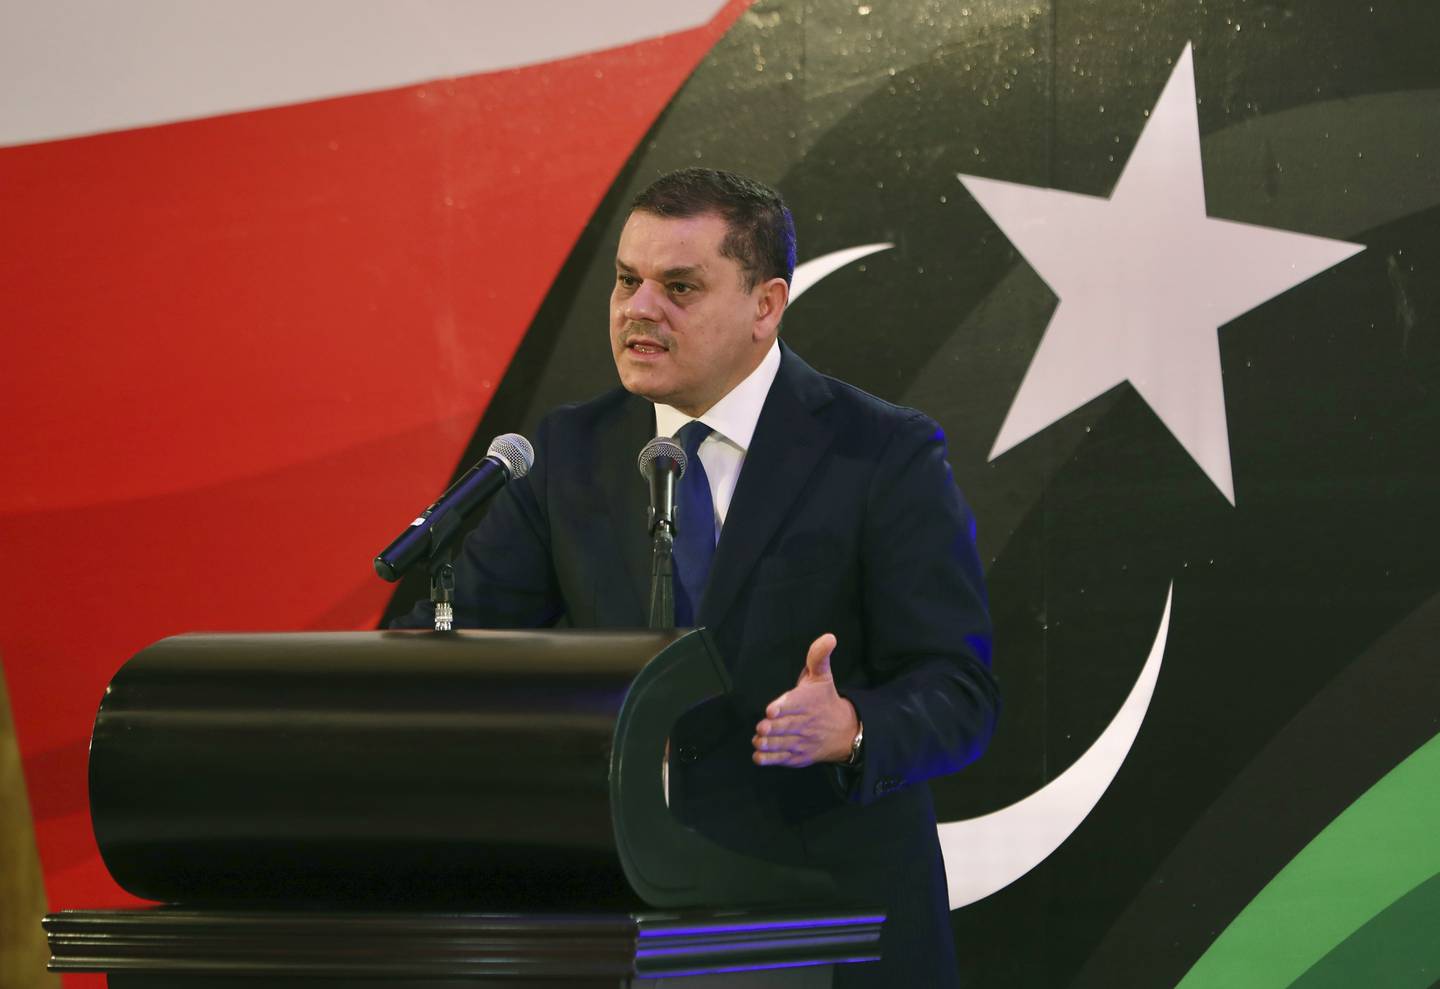 Libya's interim Prime Minister Abdul Hamid Dbeibah speaks during a news conference in Tripoli. Photo: AP